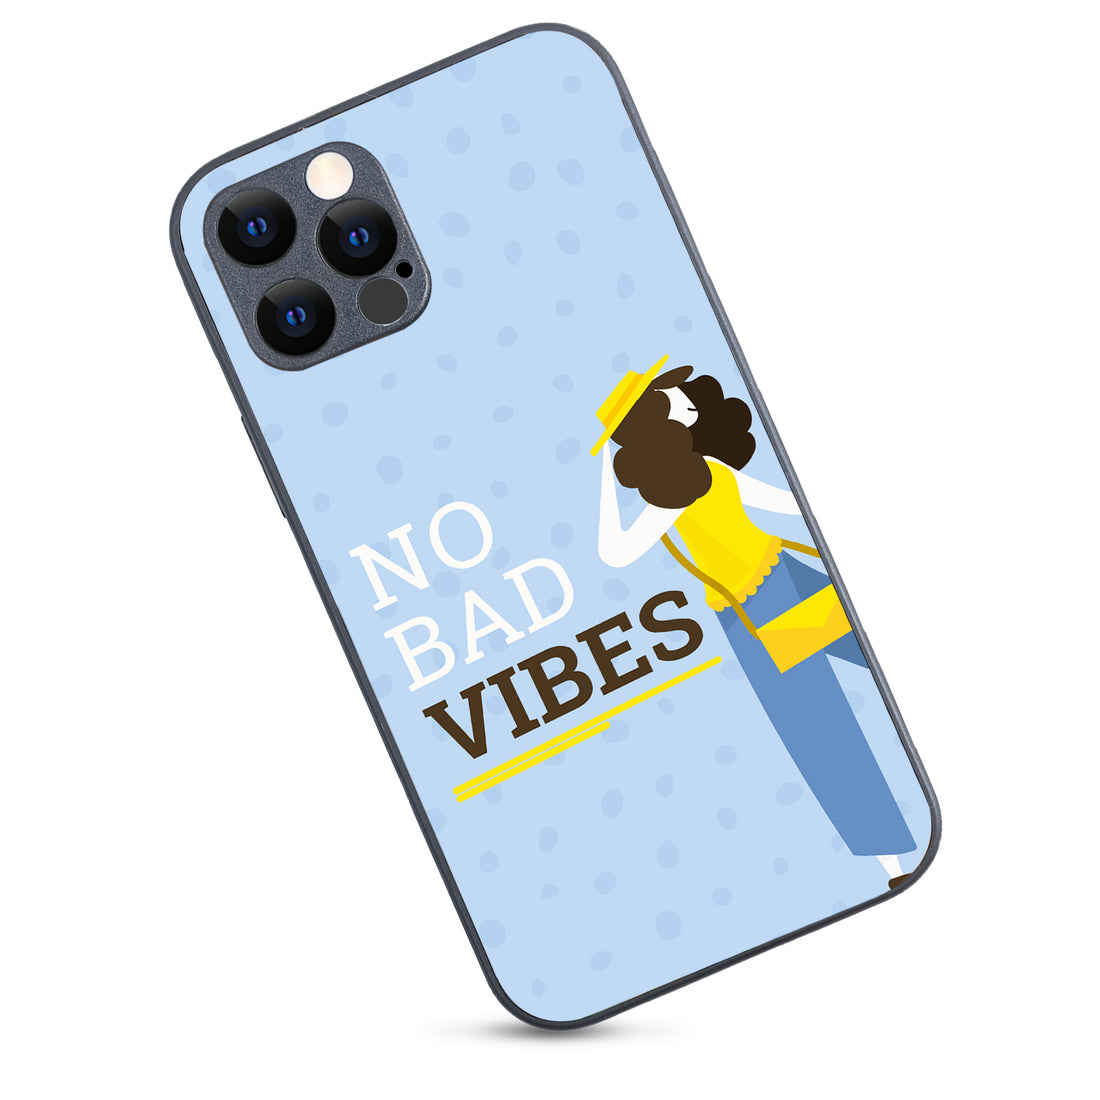 No Bad Vibes Motivational Quotes iPhone 12 Pro Case